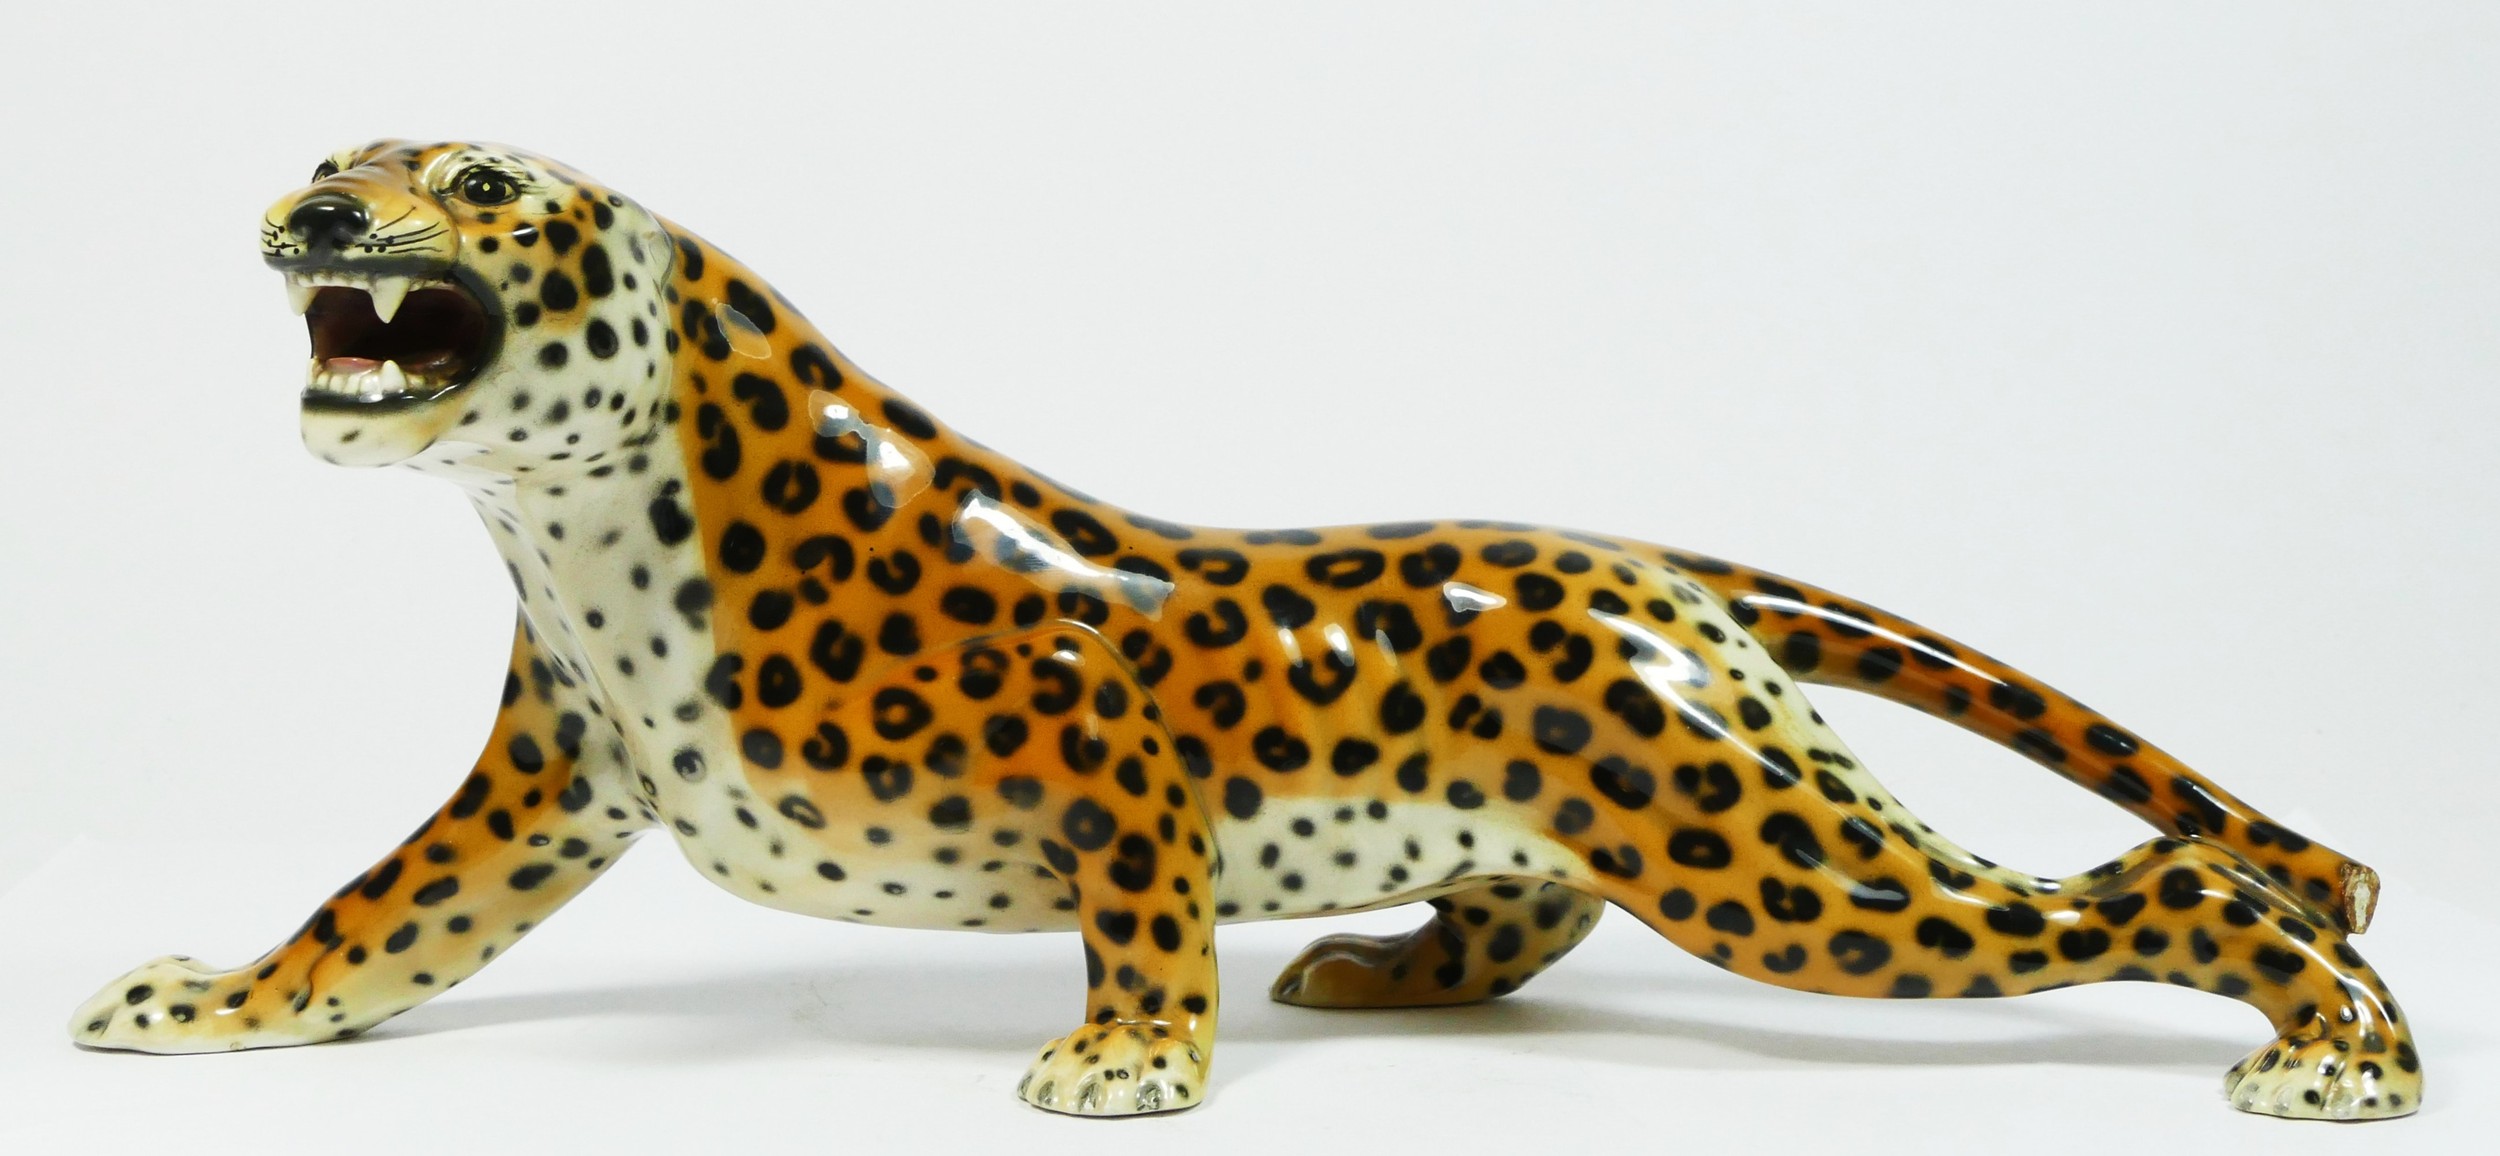 An Italian Majolica ceramic sculpture of a prowling leopard, by 